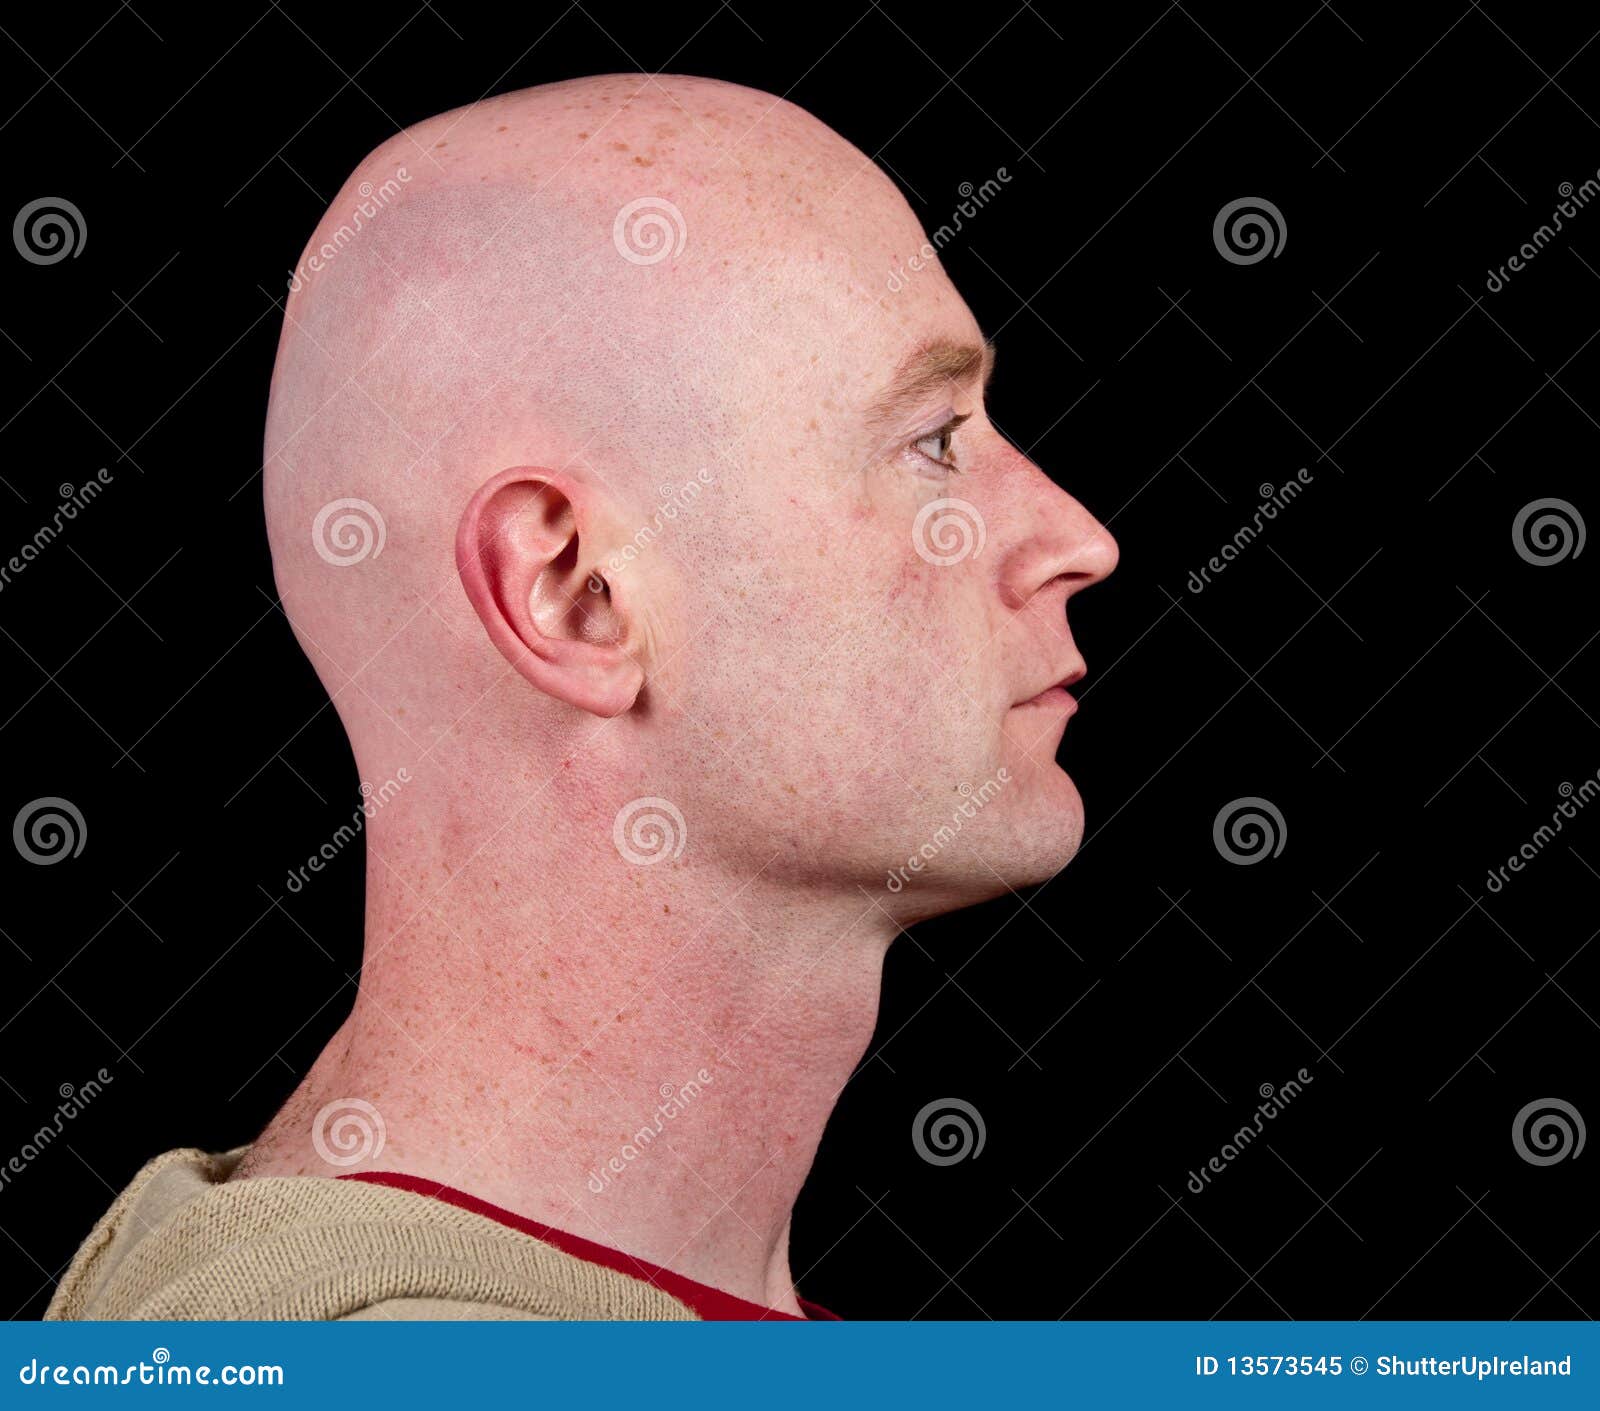 Close Up Picture Of A Male Head From Side On Black Stock Image Image Of Background Human 13573545